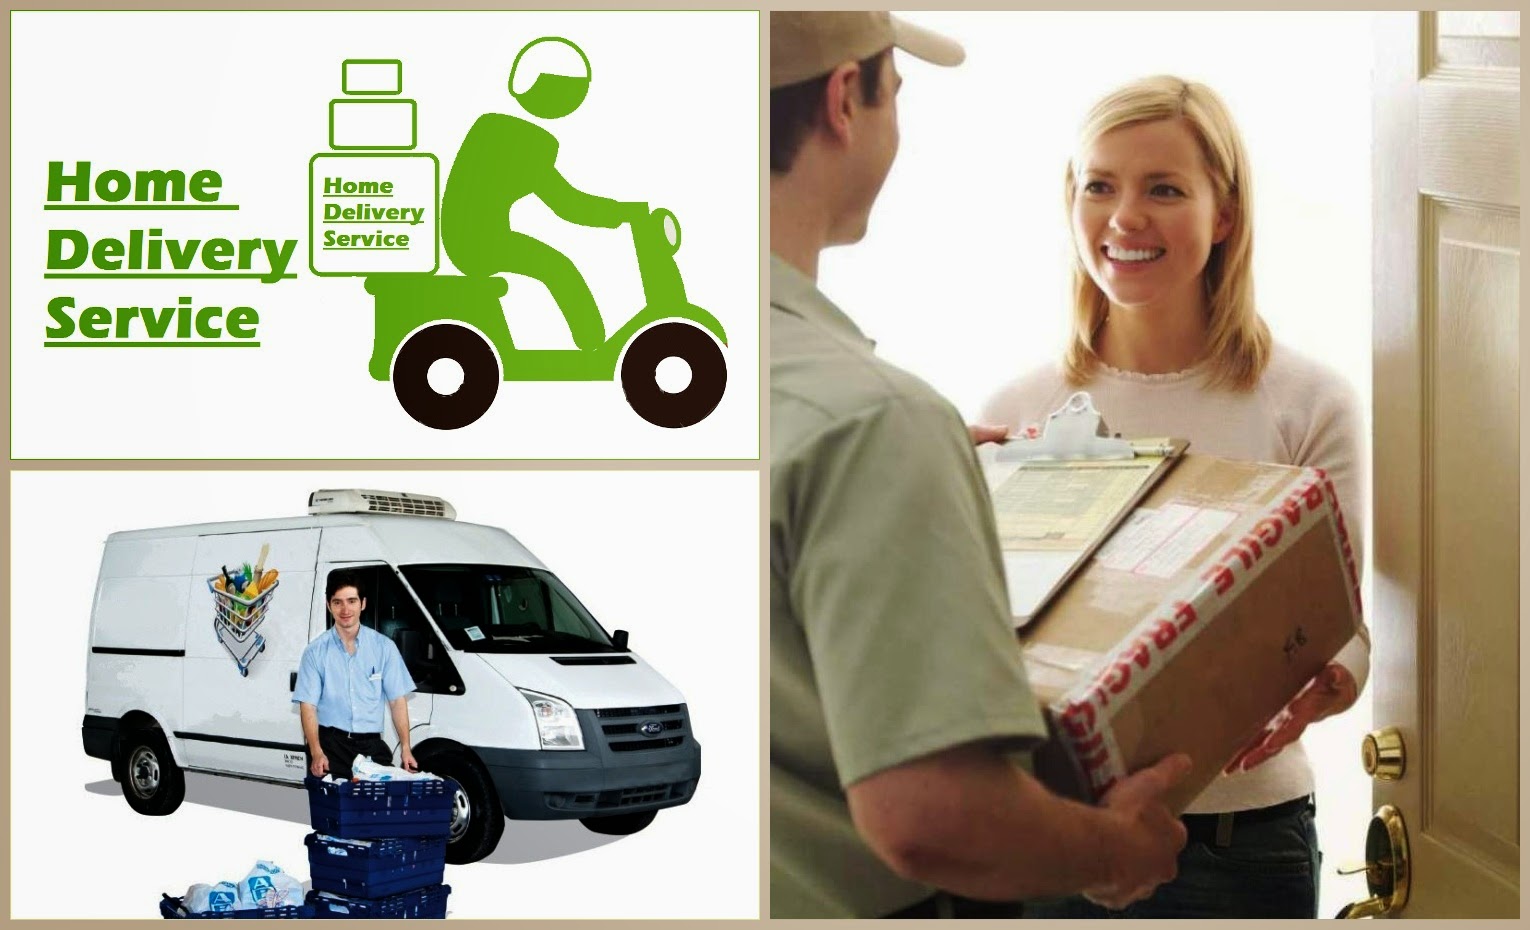 Home Delivery Business